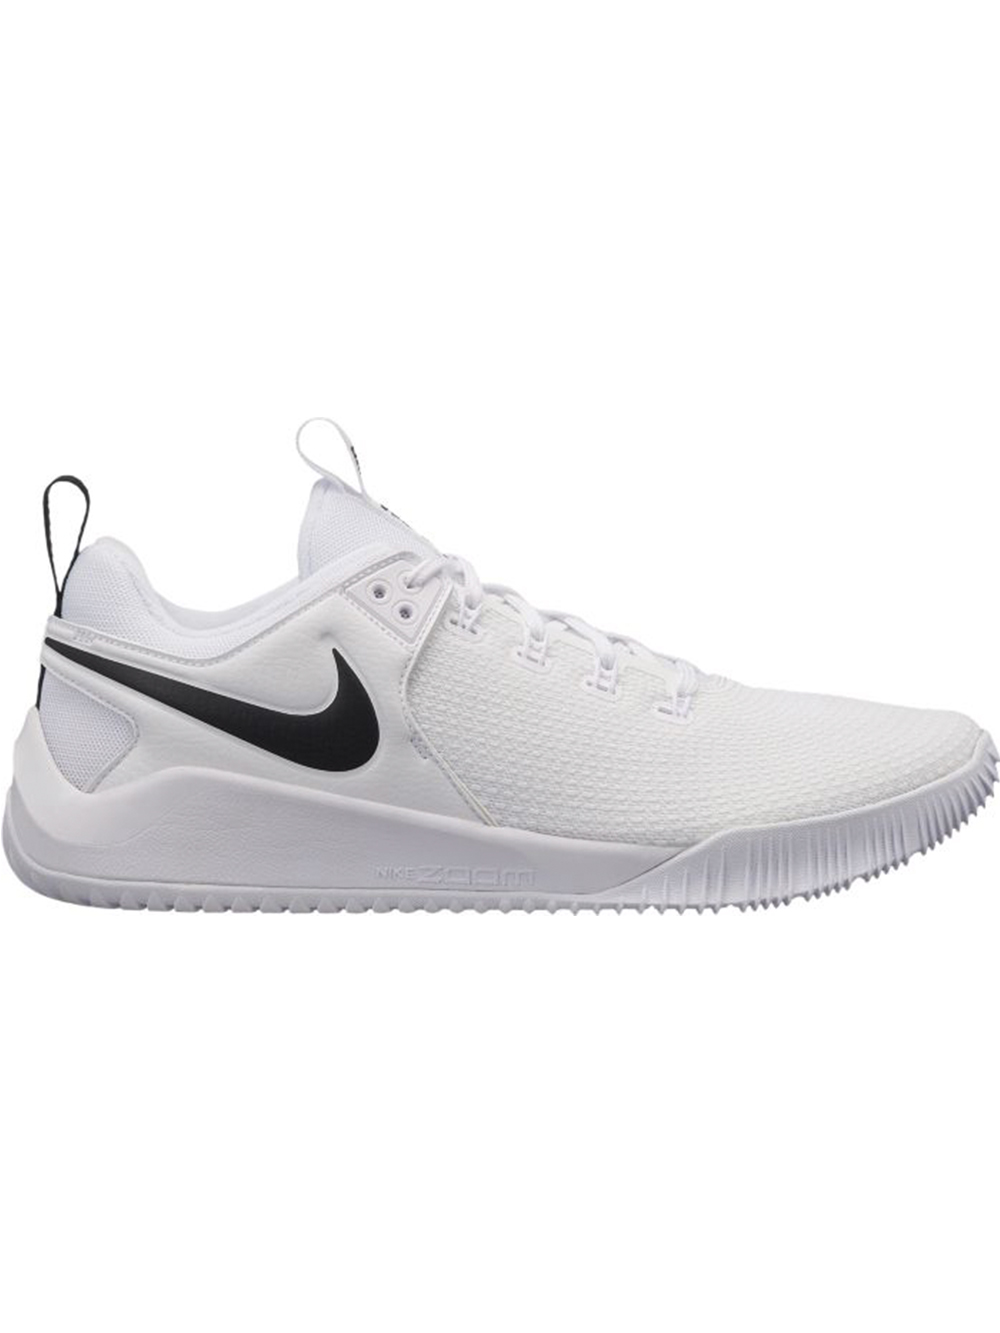 white nike volleyball shoes